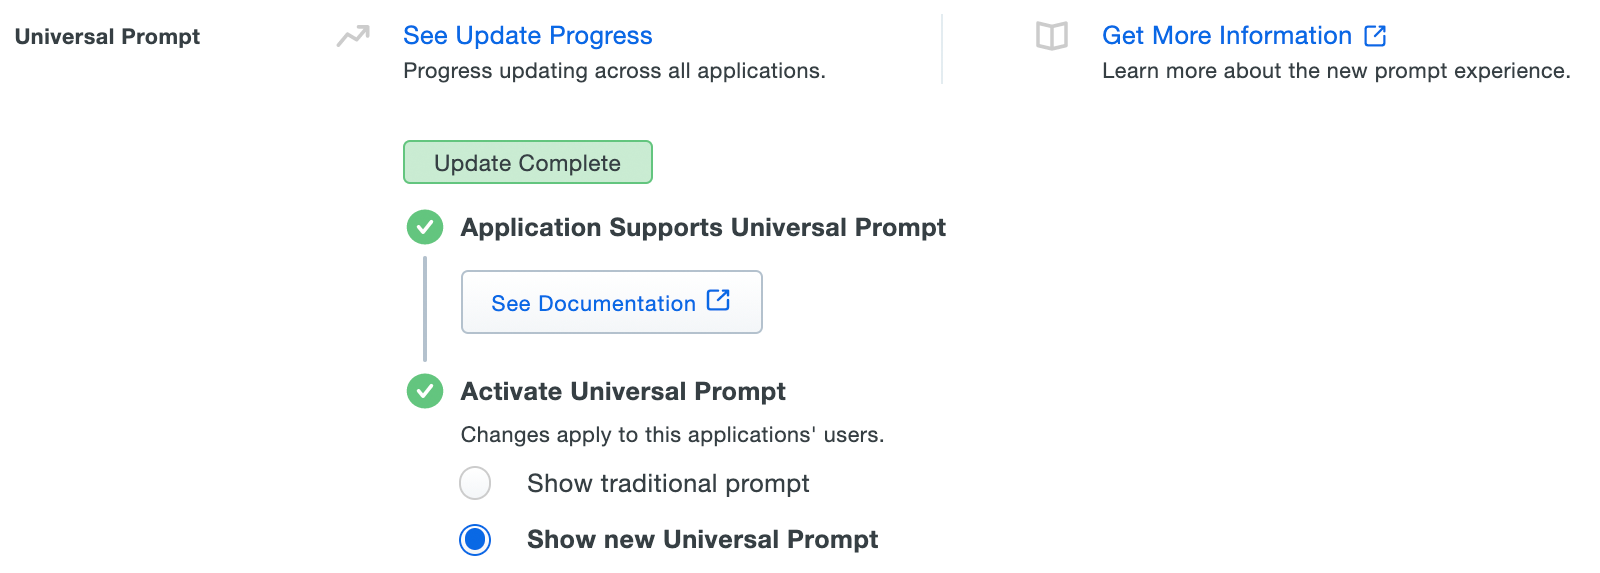 Universal Prompt Info - Universal Prompt Activation Complete